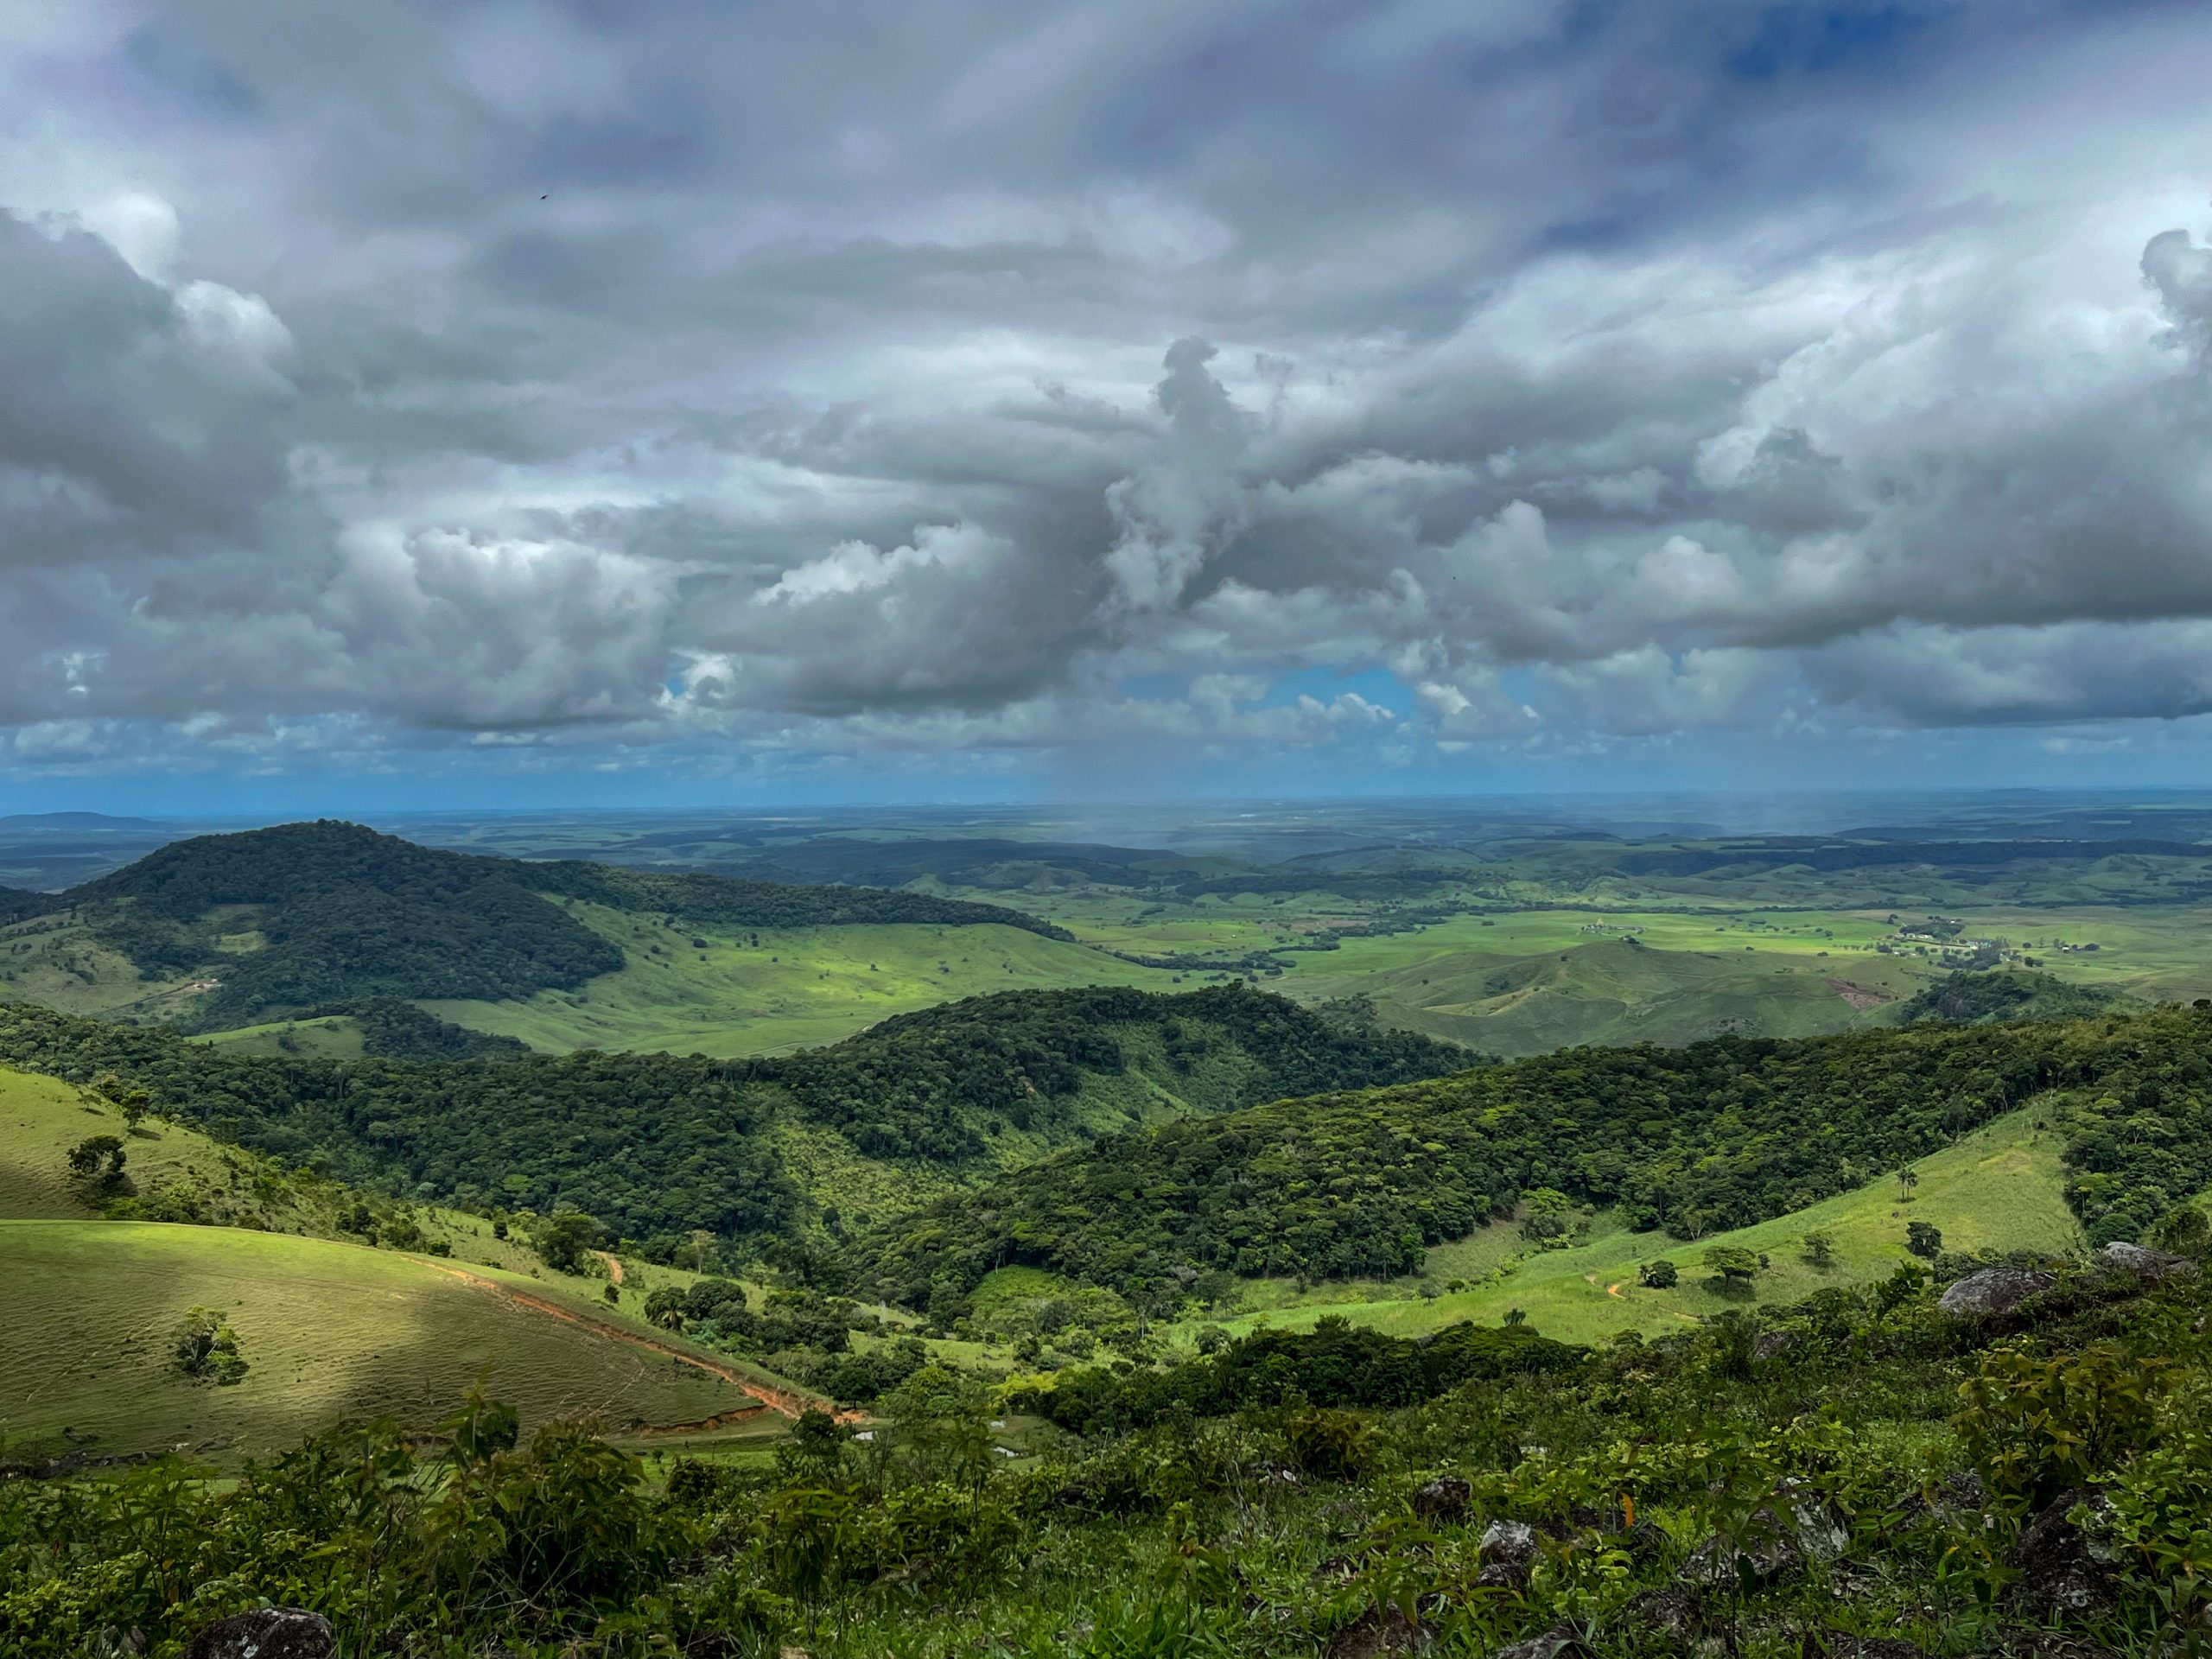 Forests2Follow - A globally significant landscape: South America's